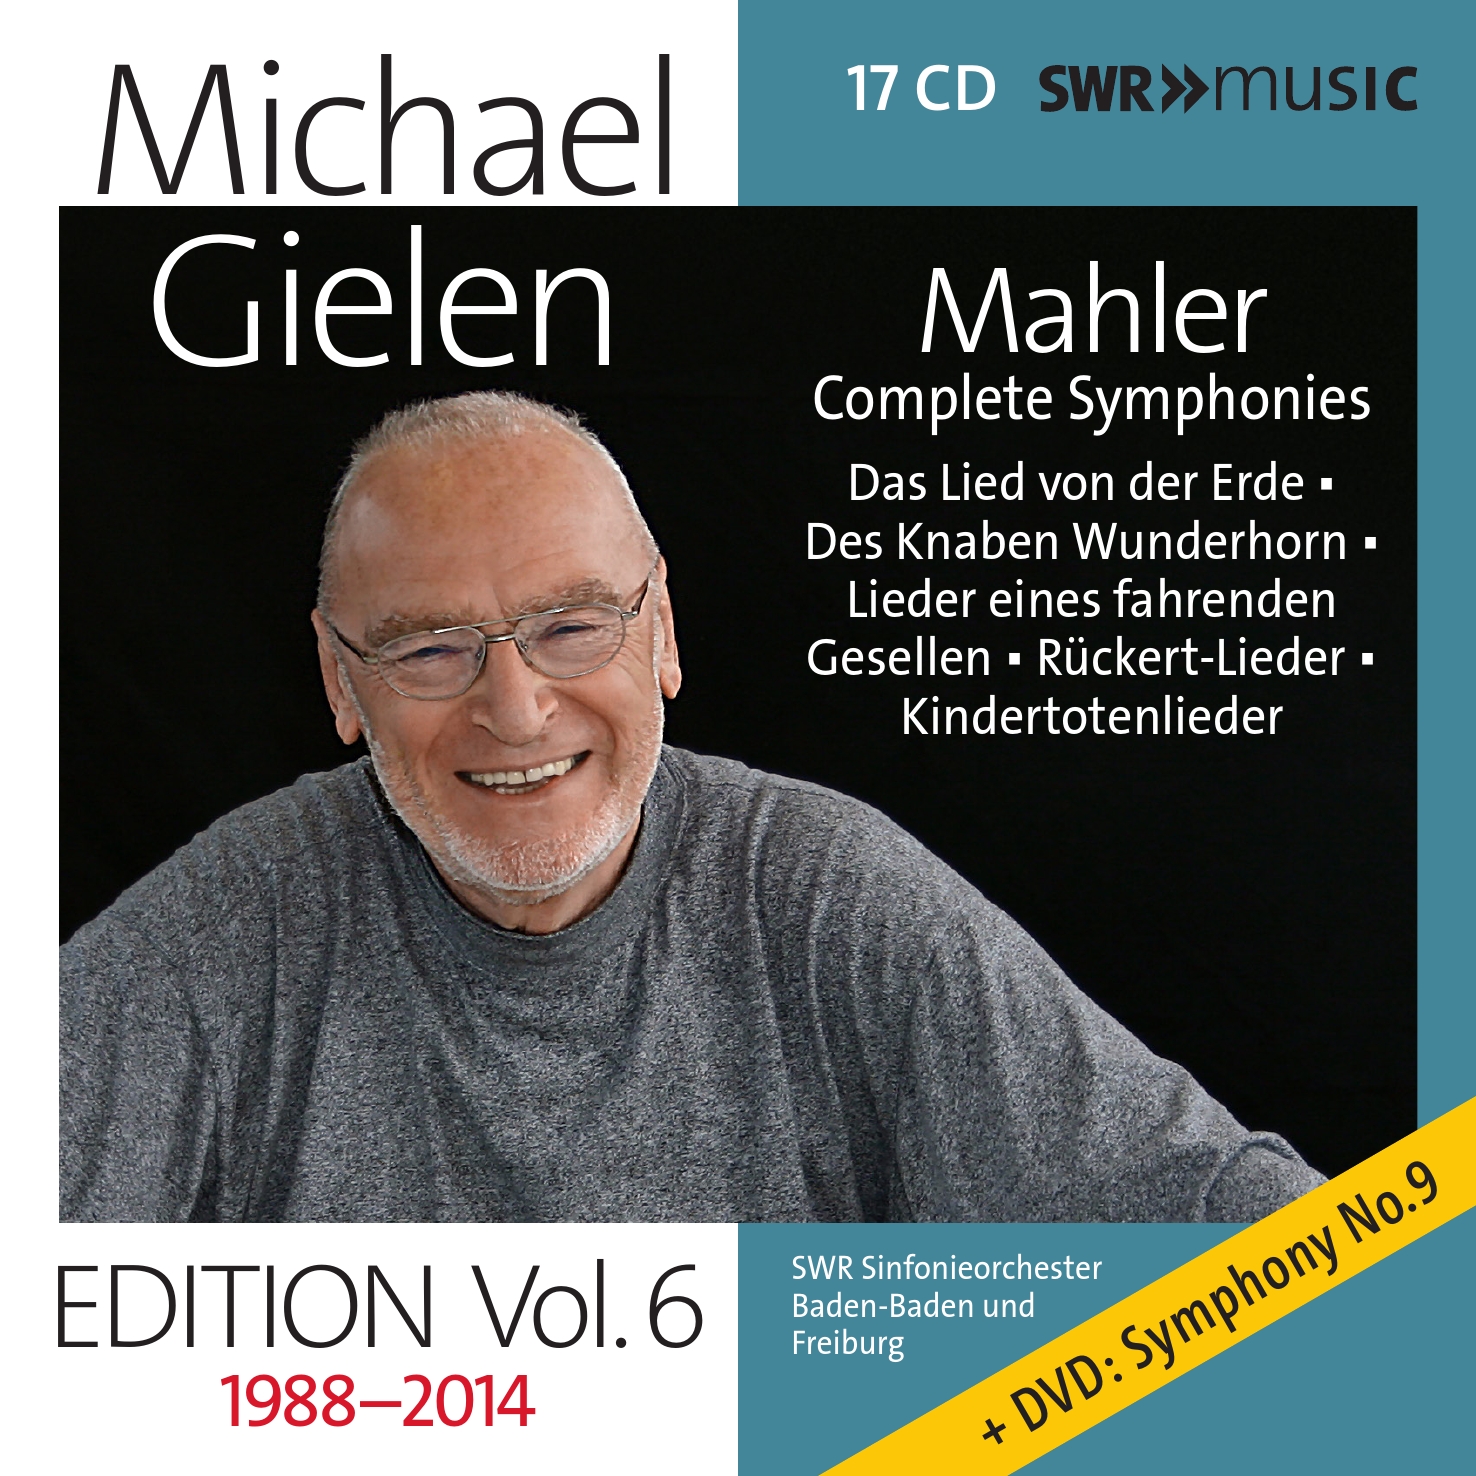 Michael Gielen Ed - Vol 6 Mahler Symphonies and. Song Cycles Recorded 1988-2014 cd06